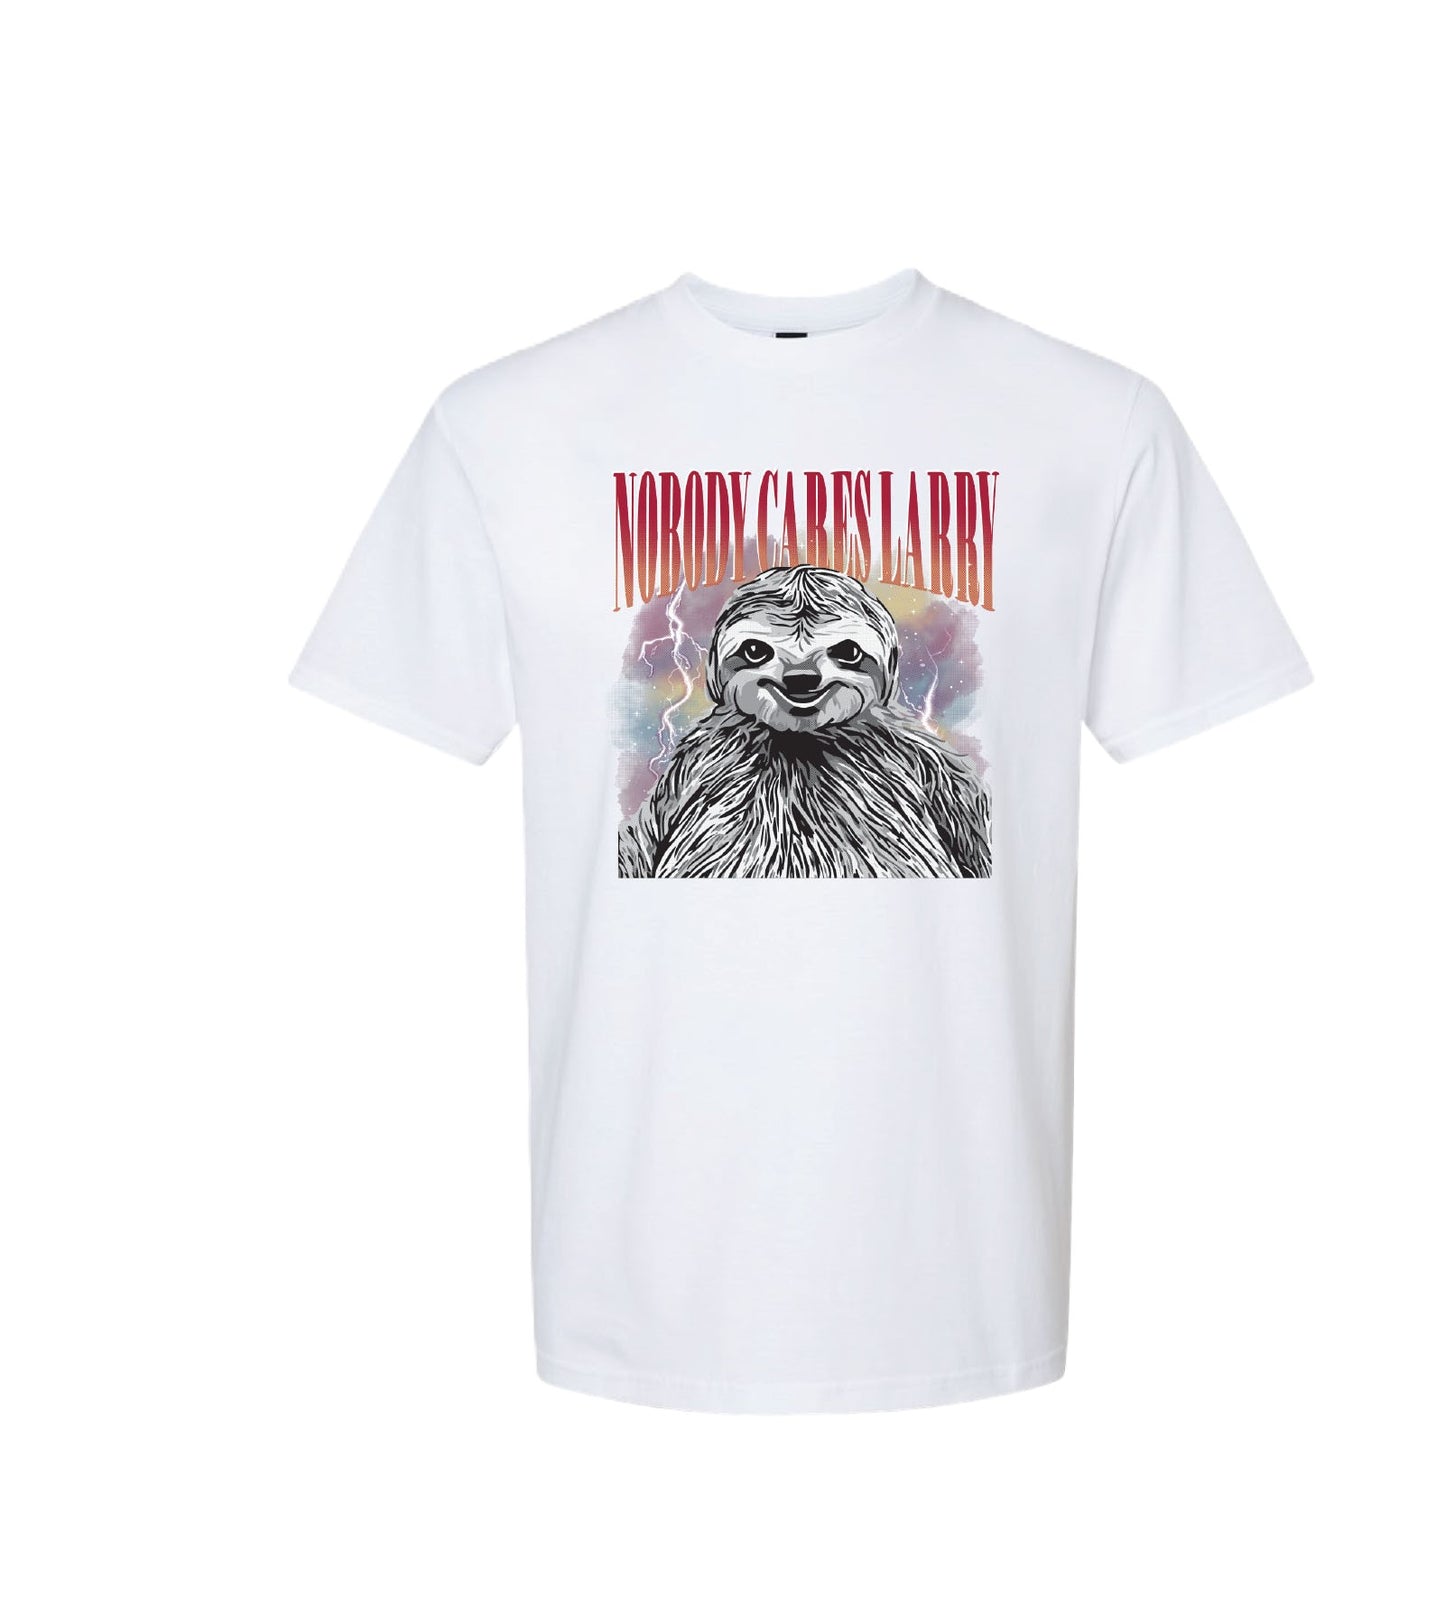 Larry the Sloth T Shirt